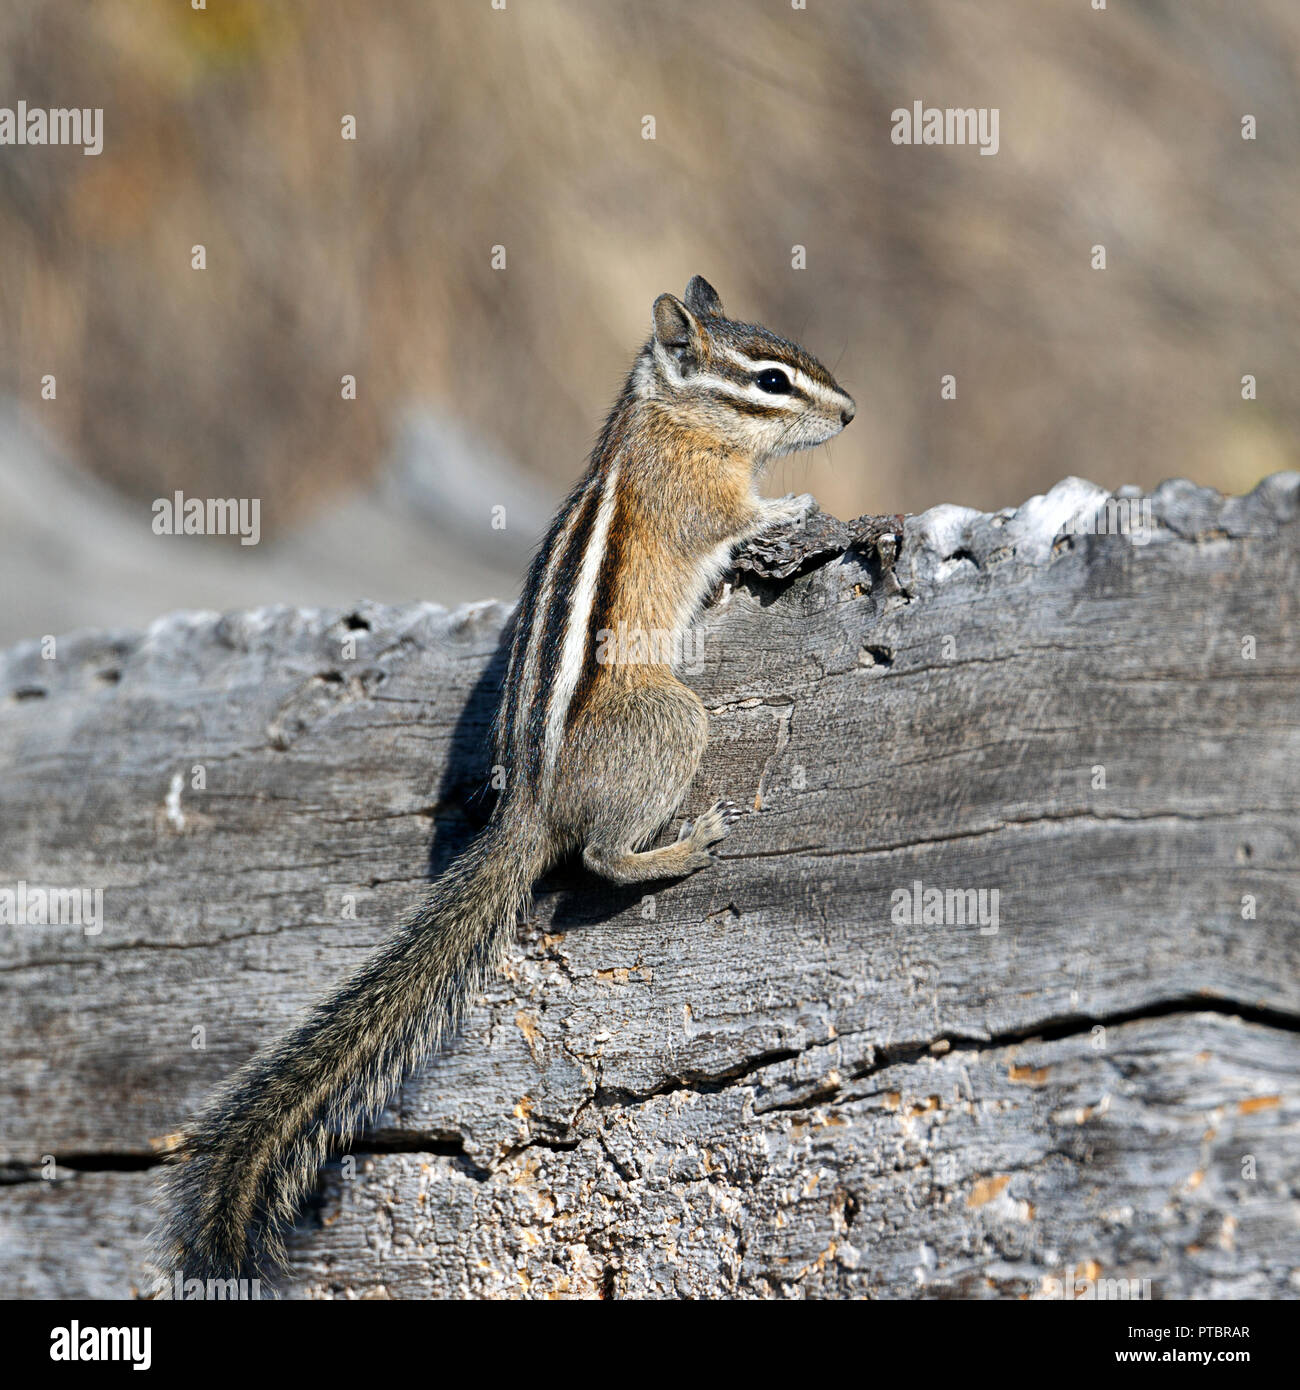 A small chipmunk hangs on the side of an old fallen log at turnbull wildlife refuge in Cheney, Washington. Stock Photo